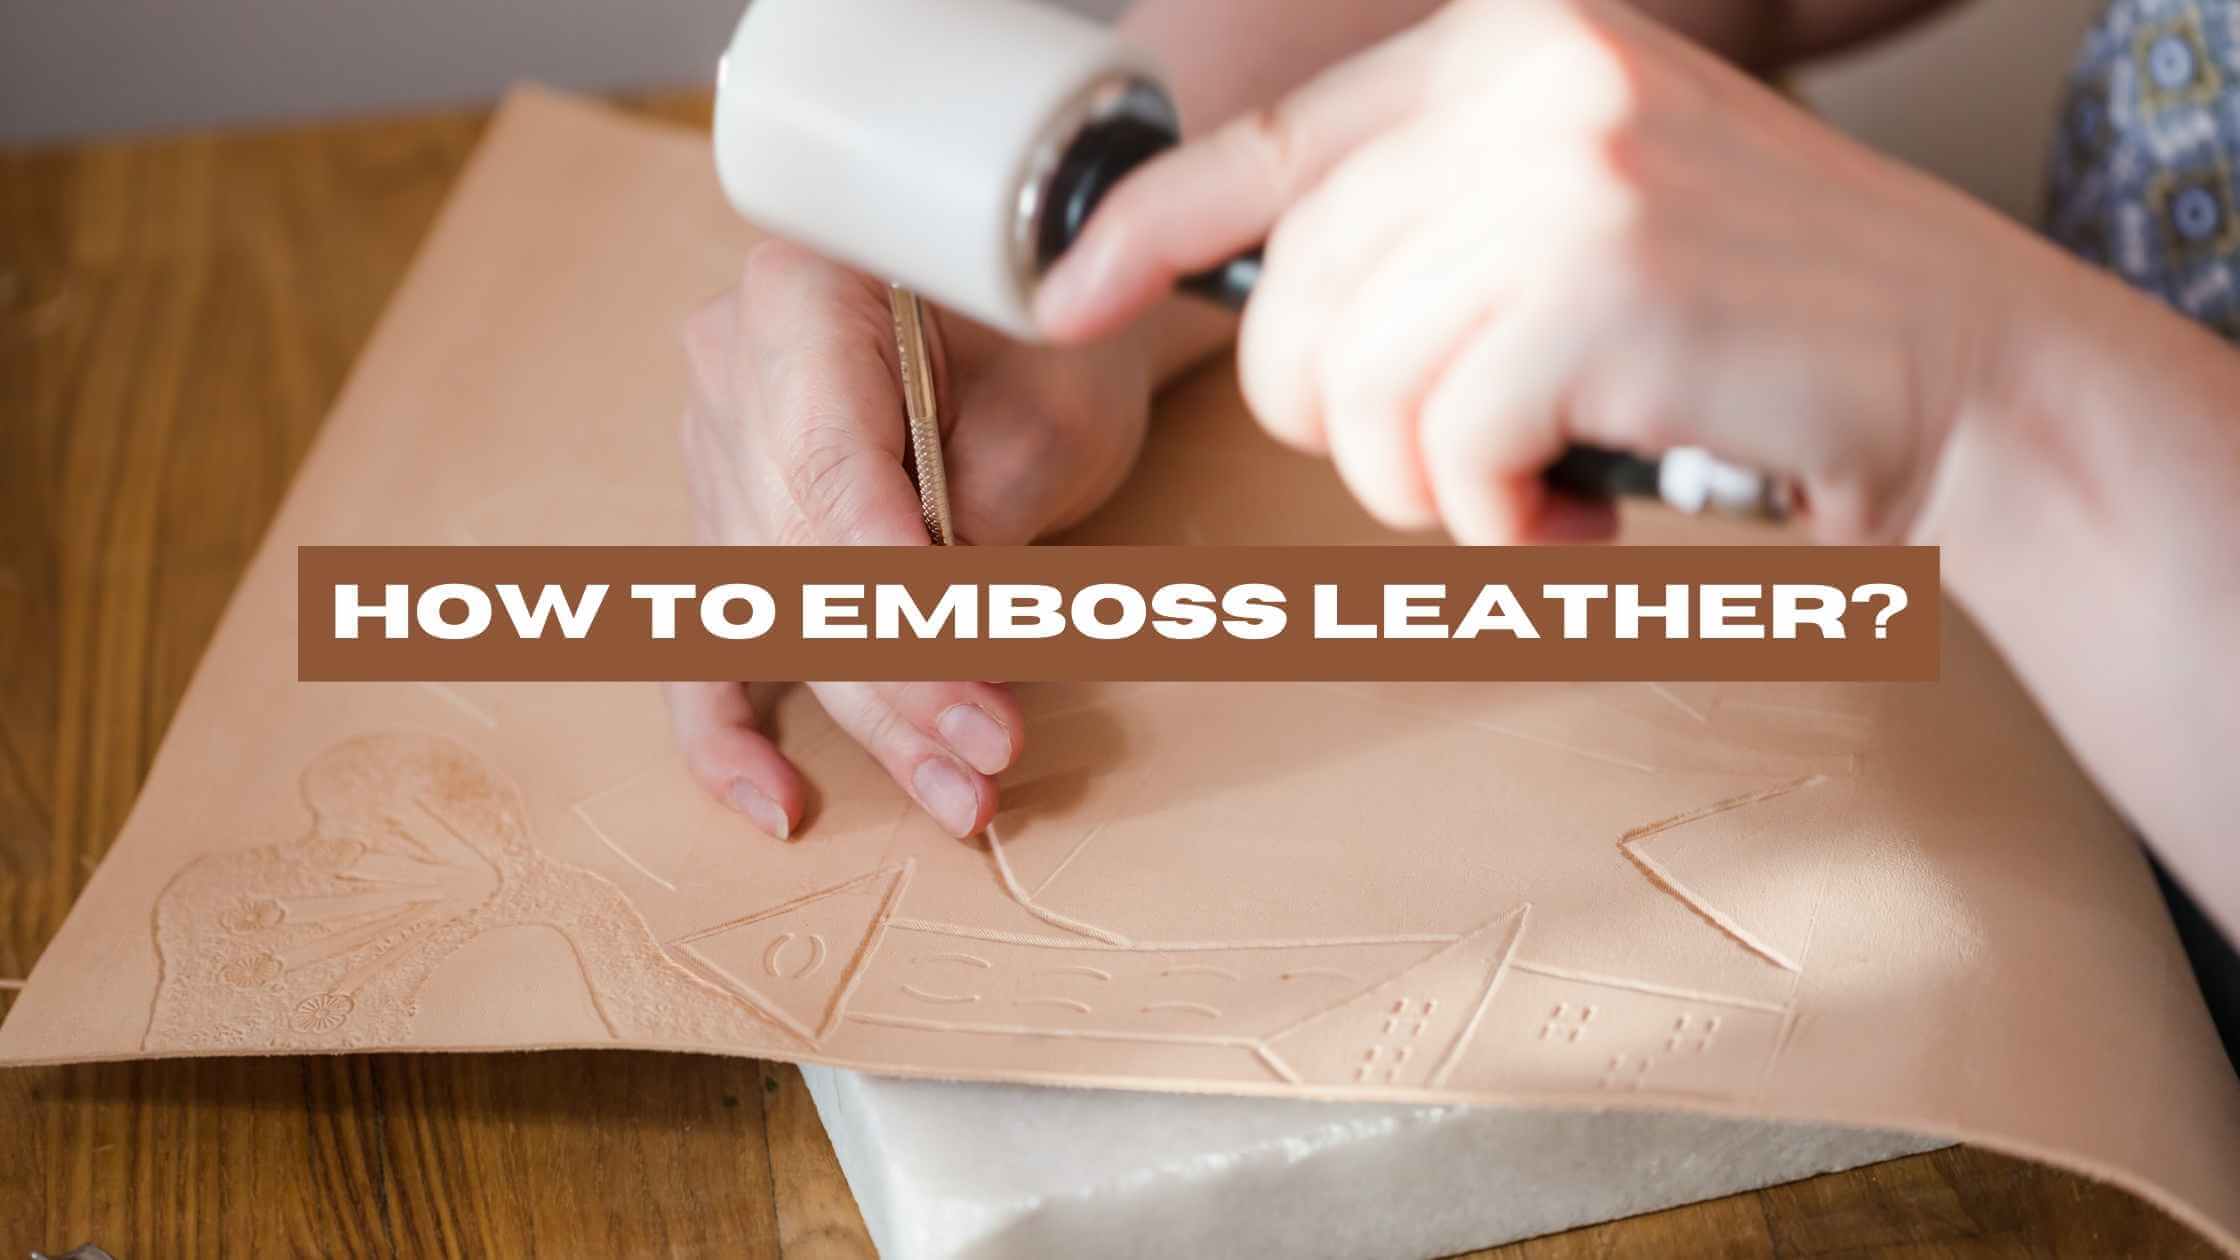 How to Emboss Leather